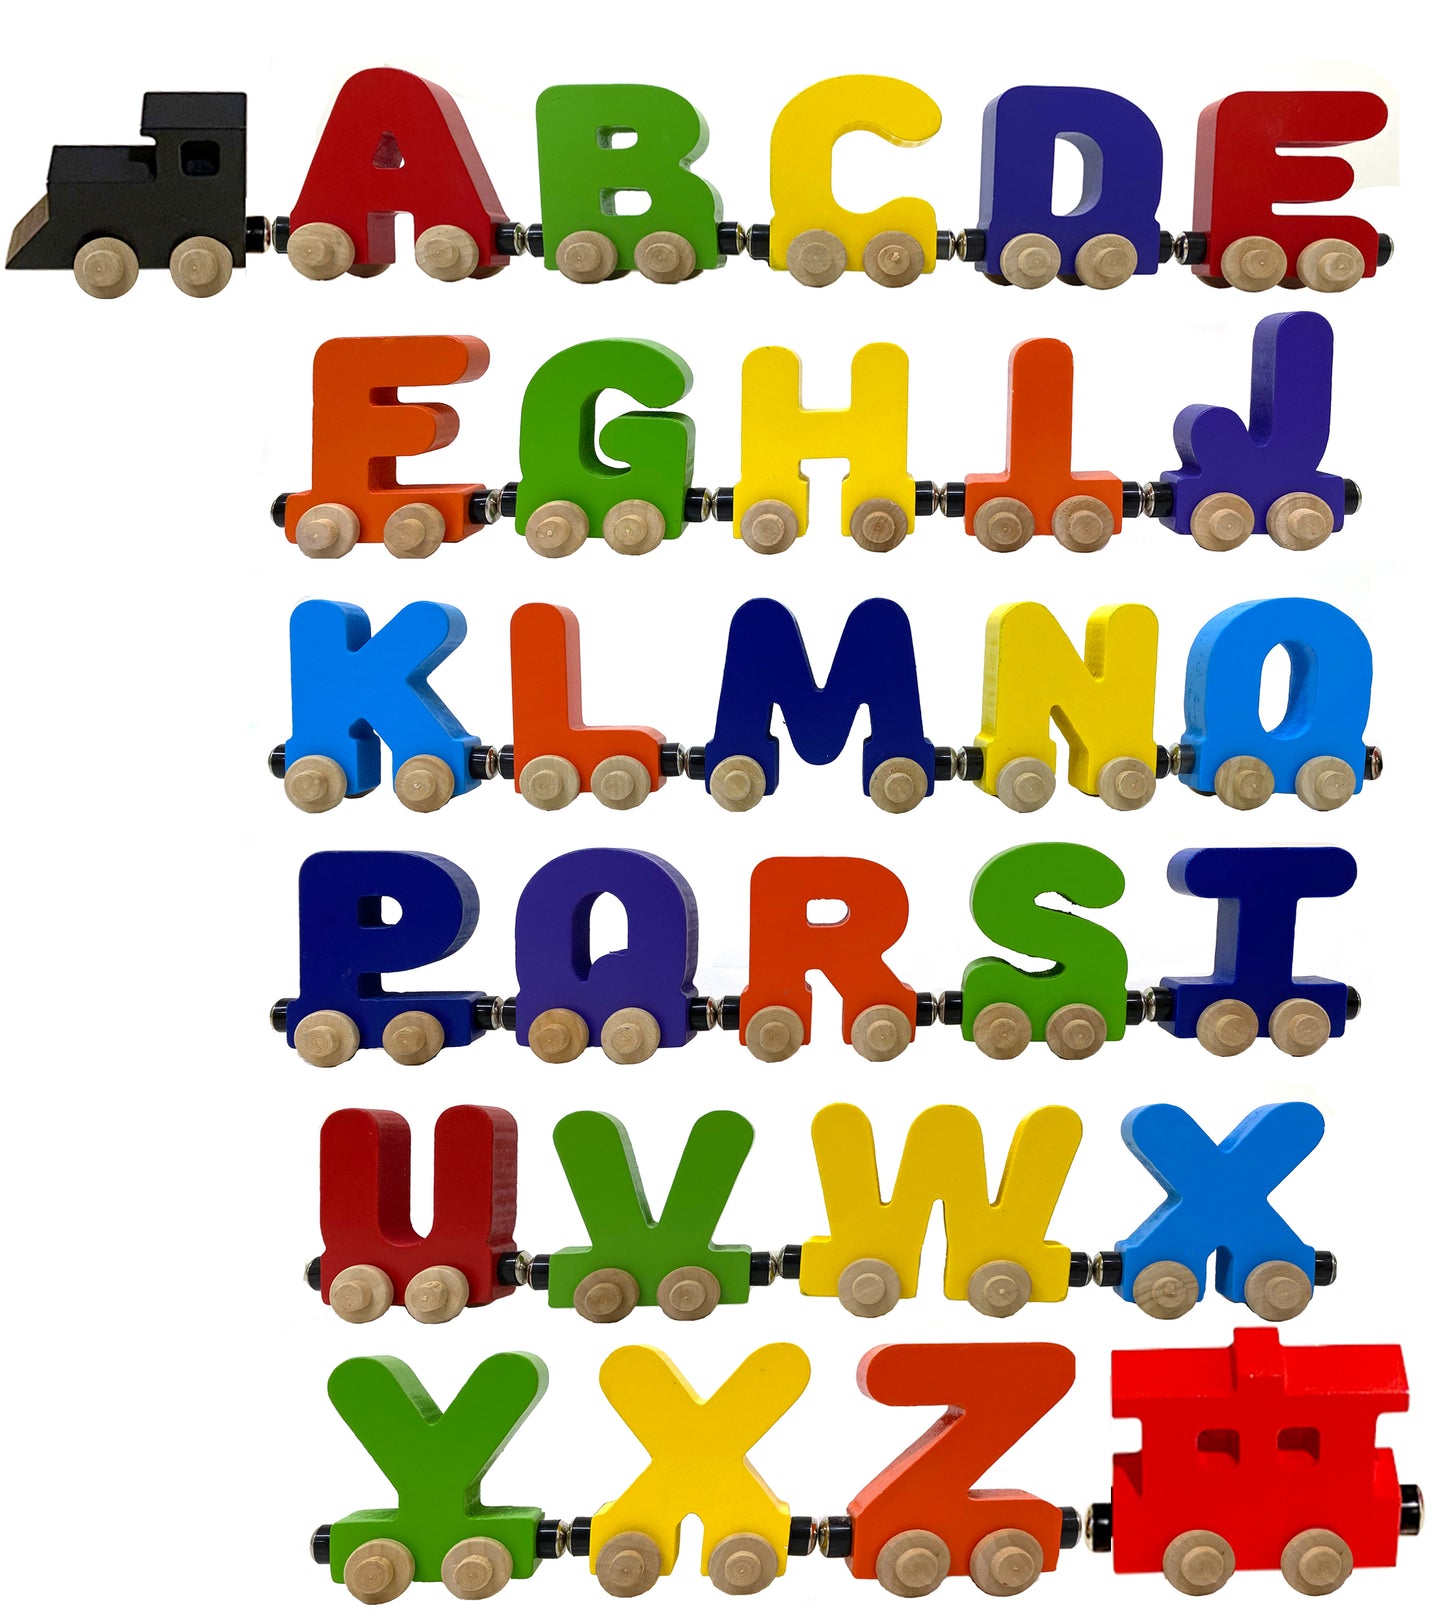 8 Letter Train Wooden Perosnalized Name Letters Includes Train & Wagon Letters Puzzle Includes Train & Wagon Free